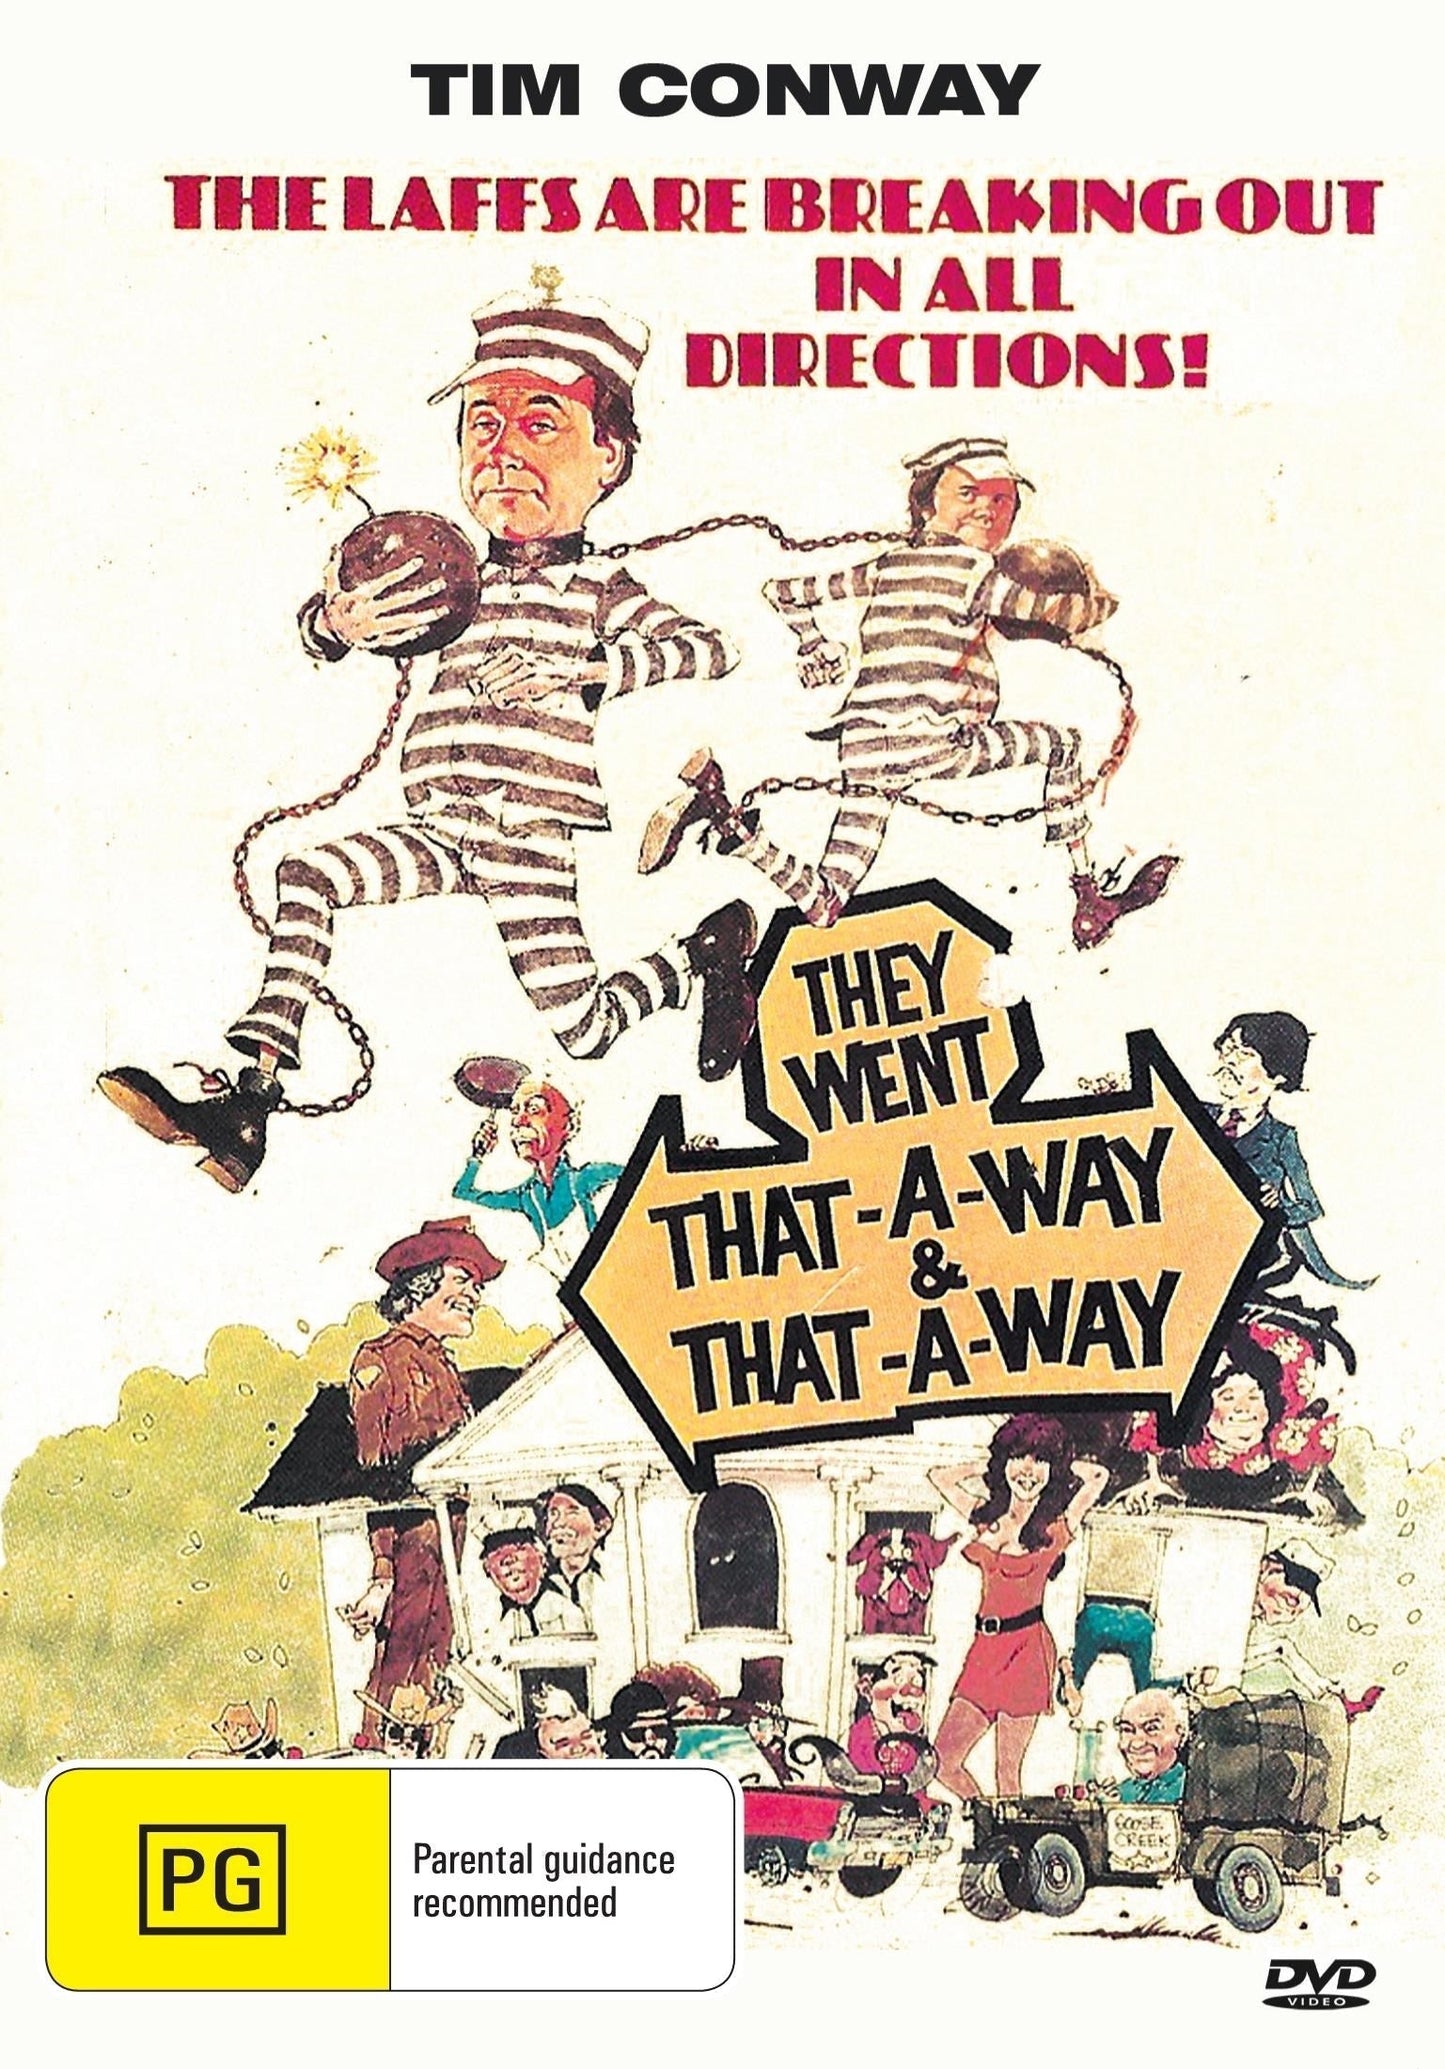 They Went That-A-Way & That-A-Way rareandcollectibledvds